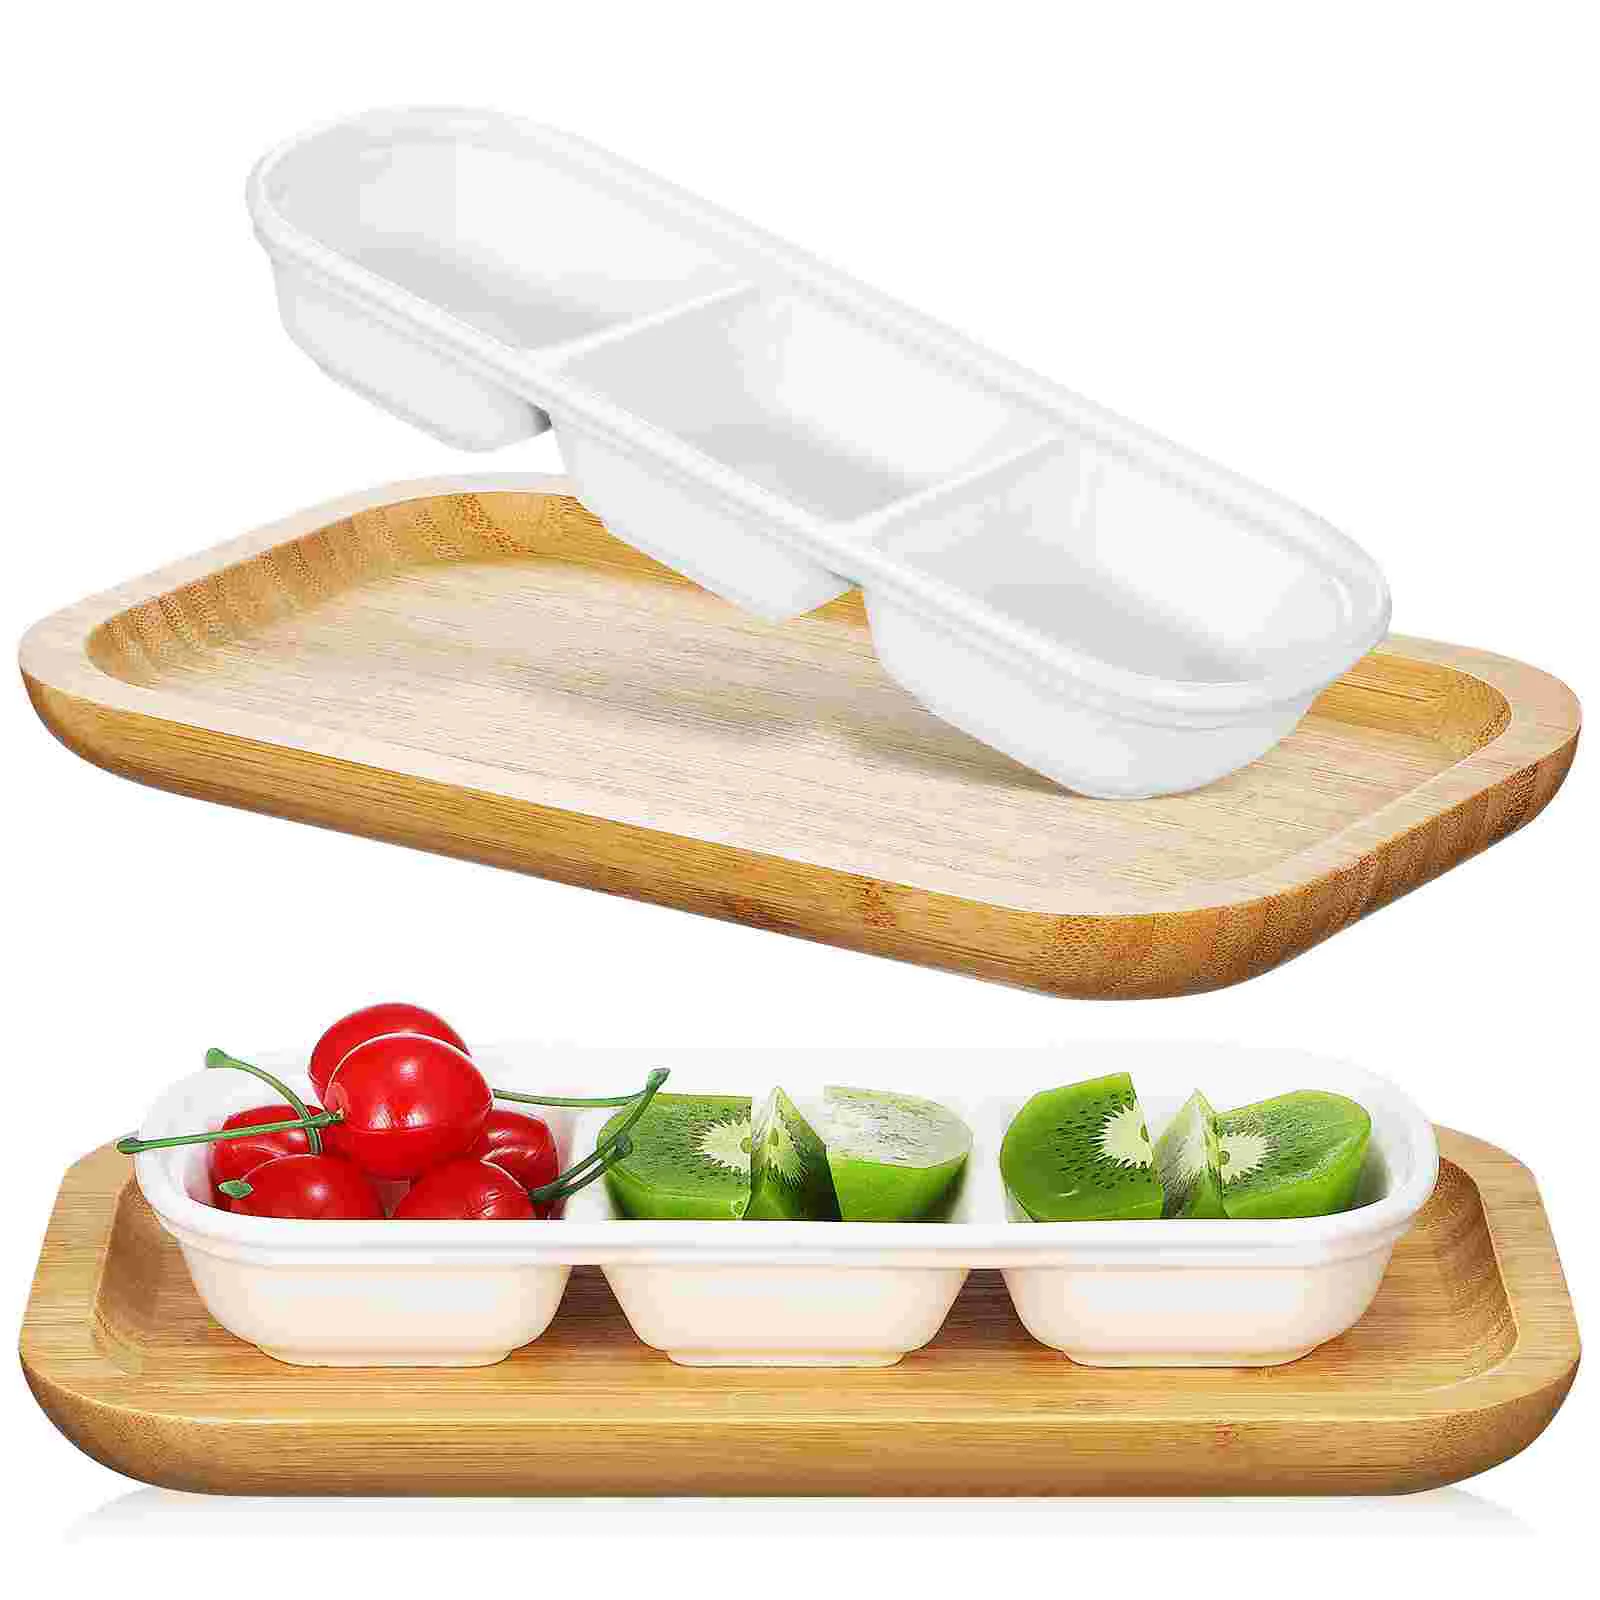 

2Pcs Sauce Dishes Ceramic Dipping Bowls Appetizer Plates with 2 Wood Serving Tray for Snacks Fruits Candy Food